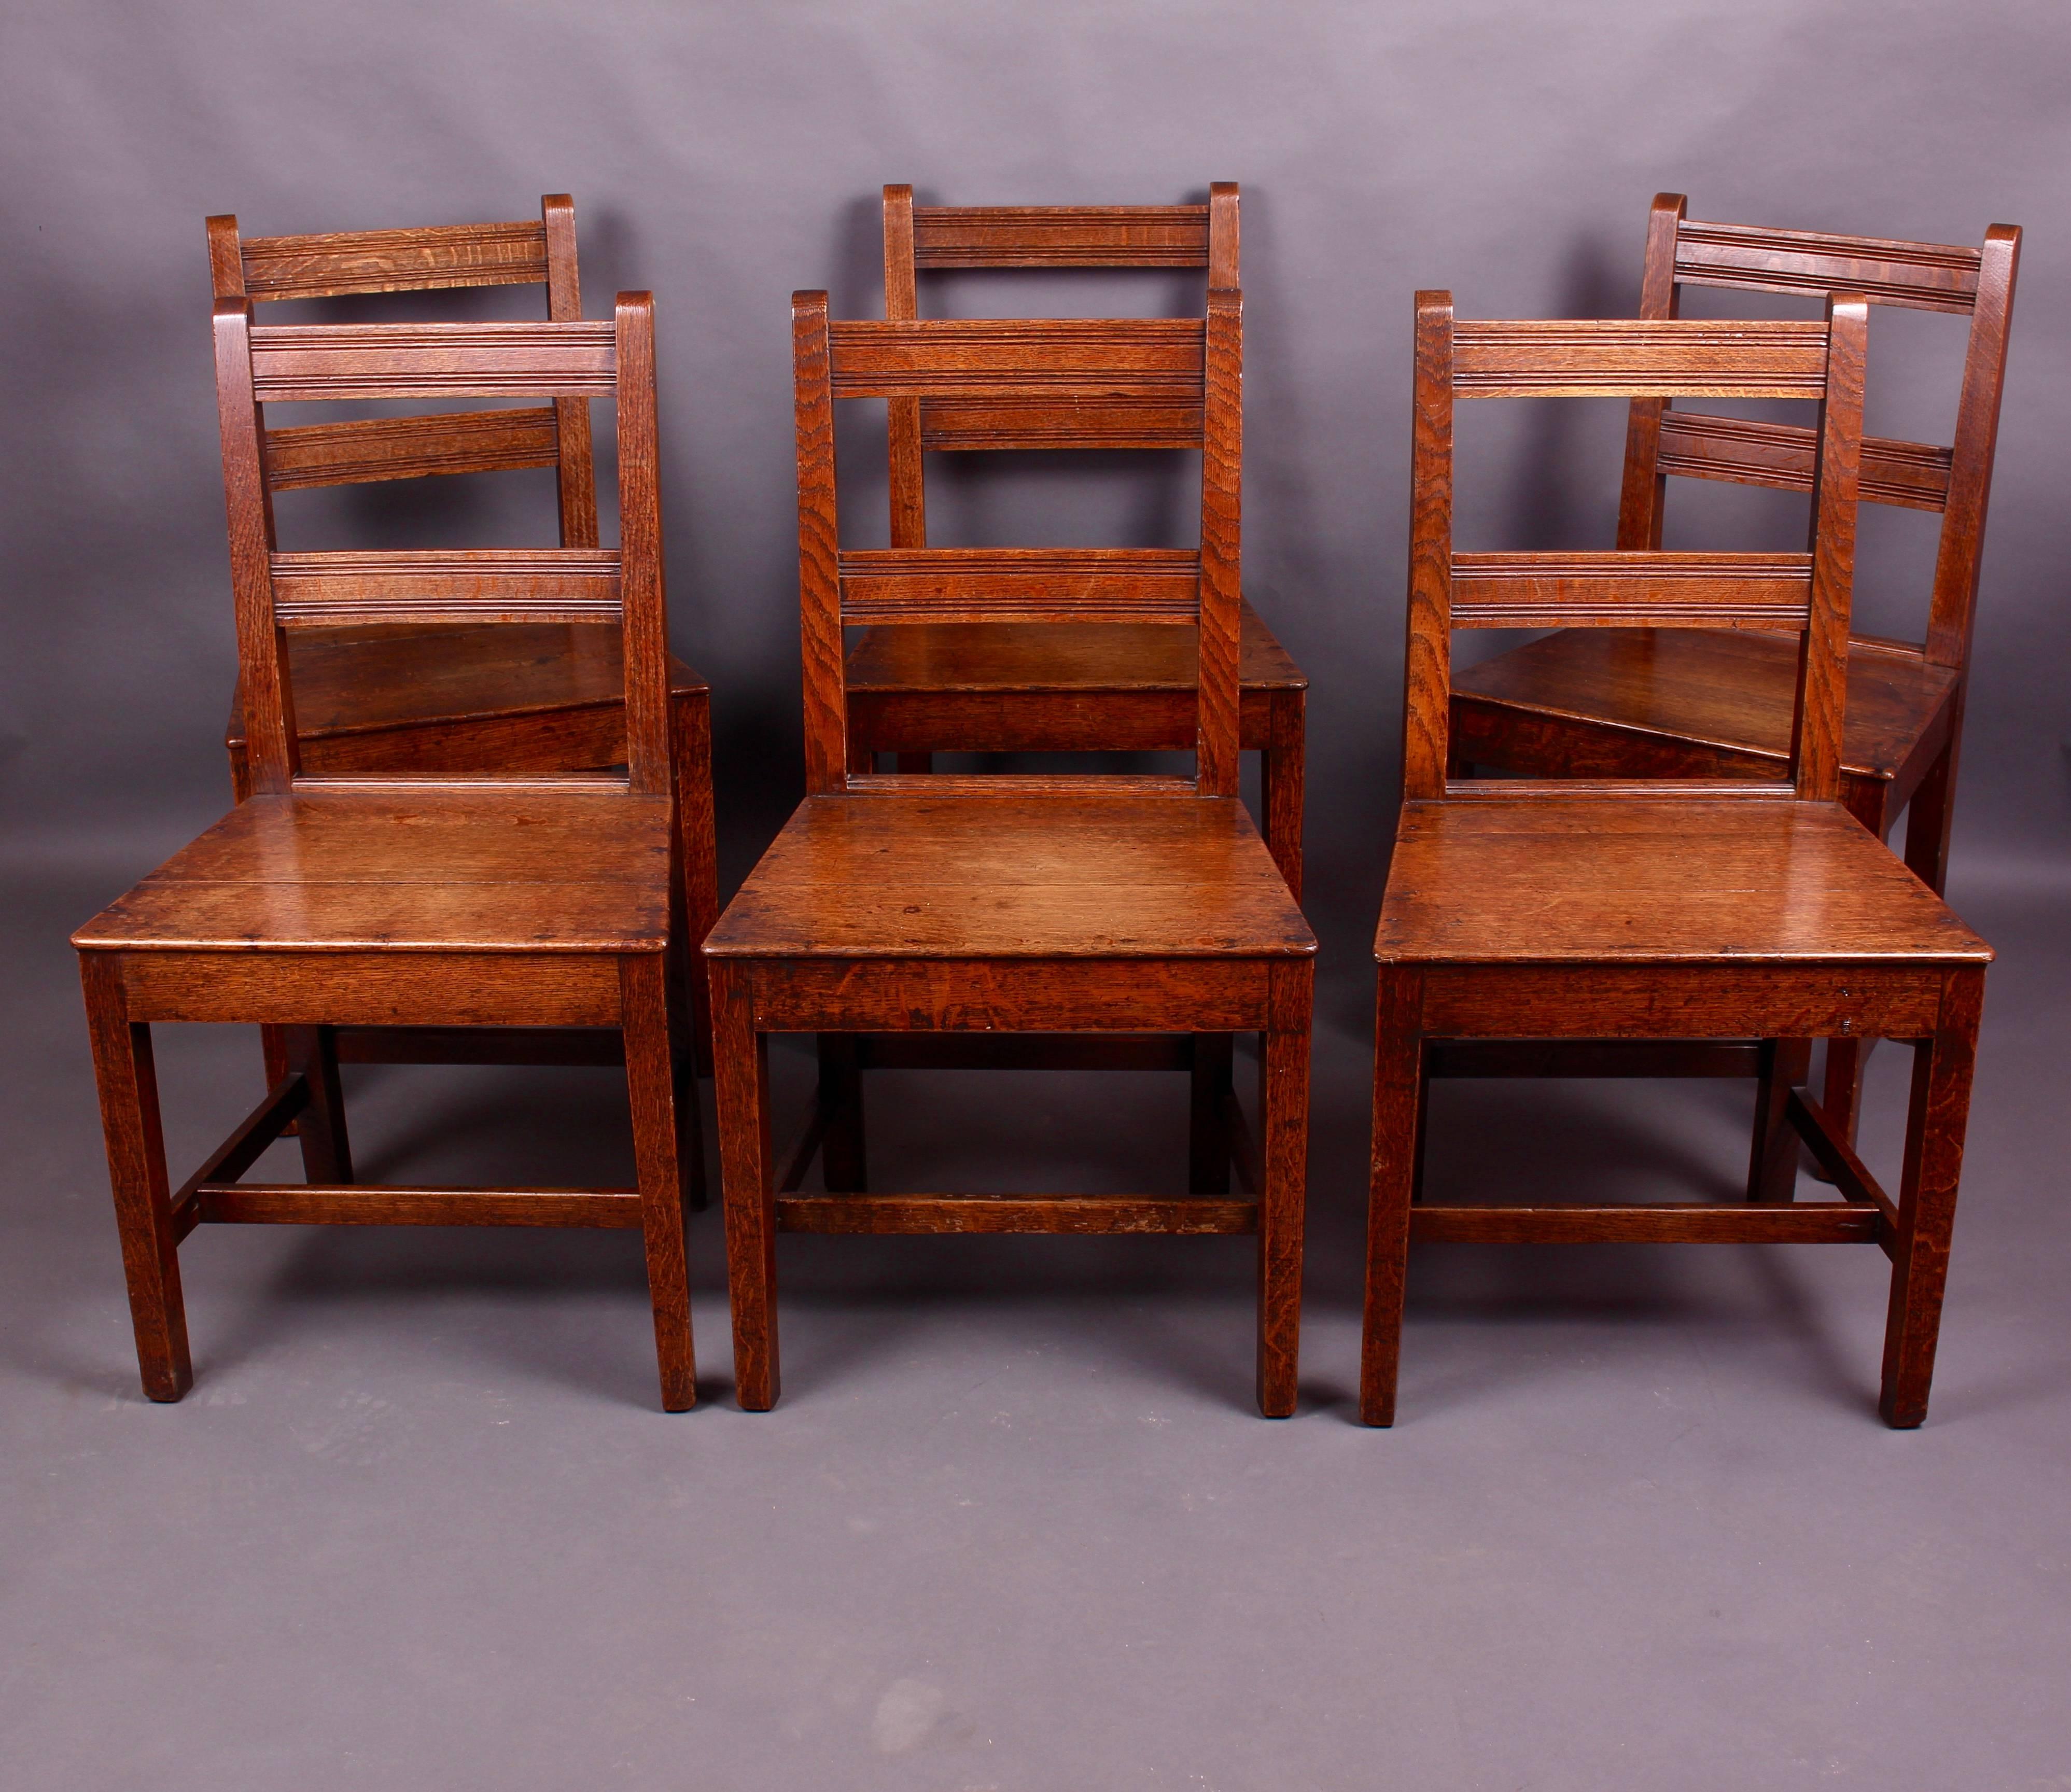 A delightful set of six Edwardian country oak dining chairs. Having the most wonderful colour and patina. The Quaker like design with its simple lines make these chairs both functional and stylish. Would suit a modern or traditional setting. They